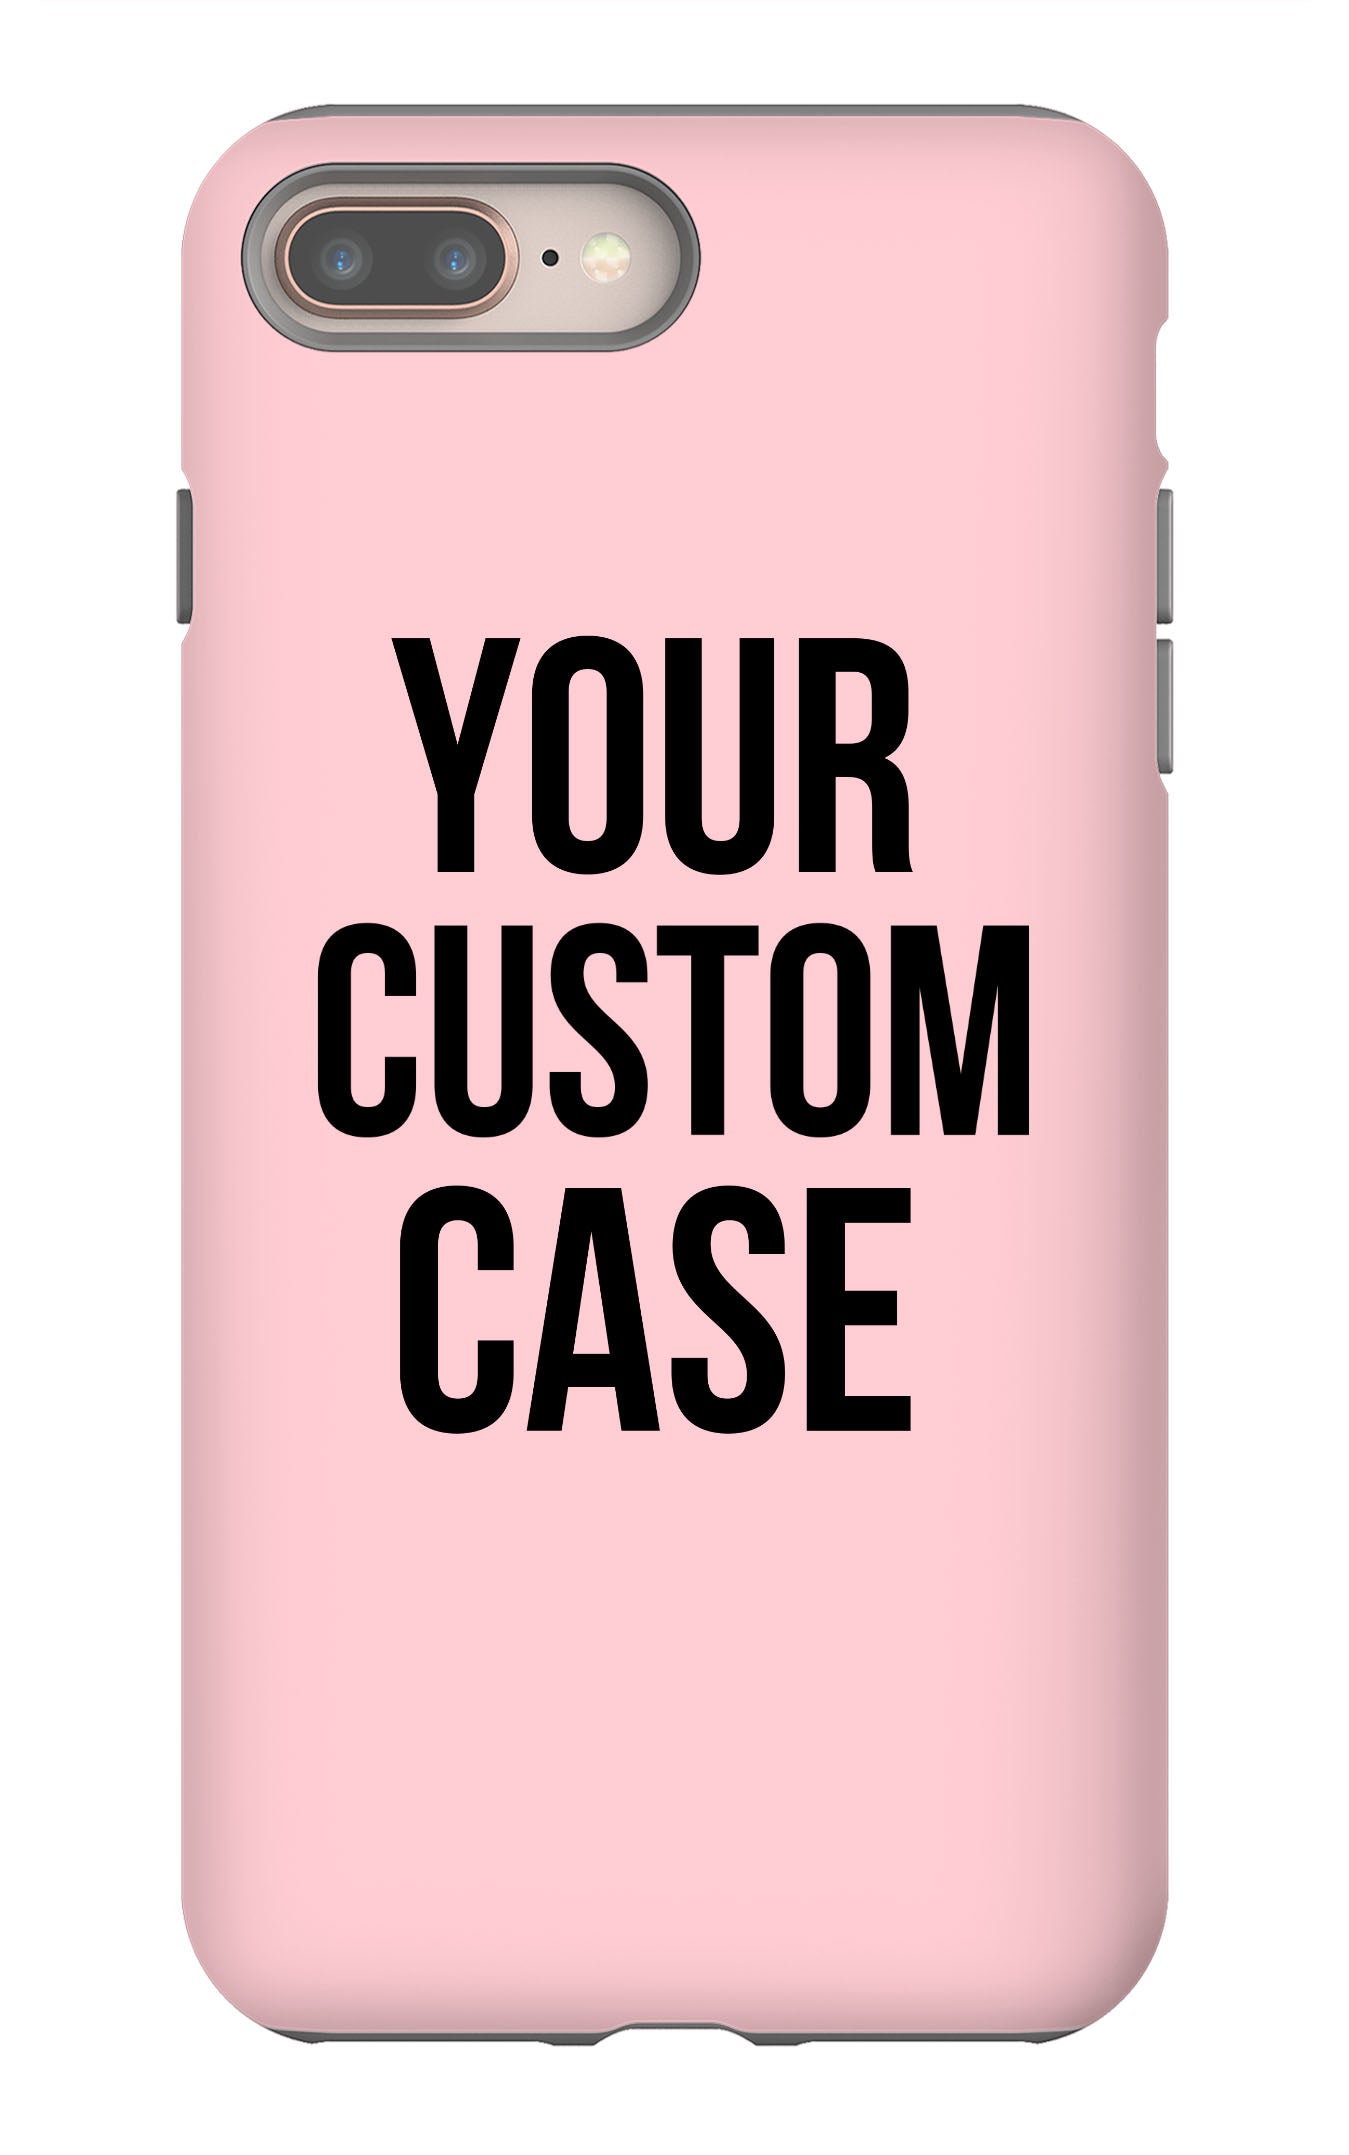 Custom iPhone 8 Plus Extra Protective Bumper Case - Your Custom Design in Cart will be Shipped - Pixly Case